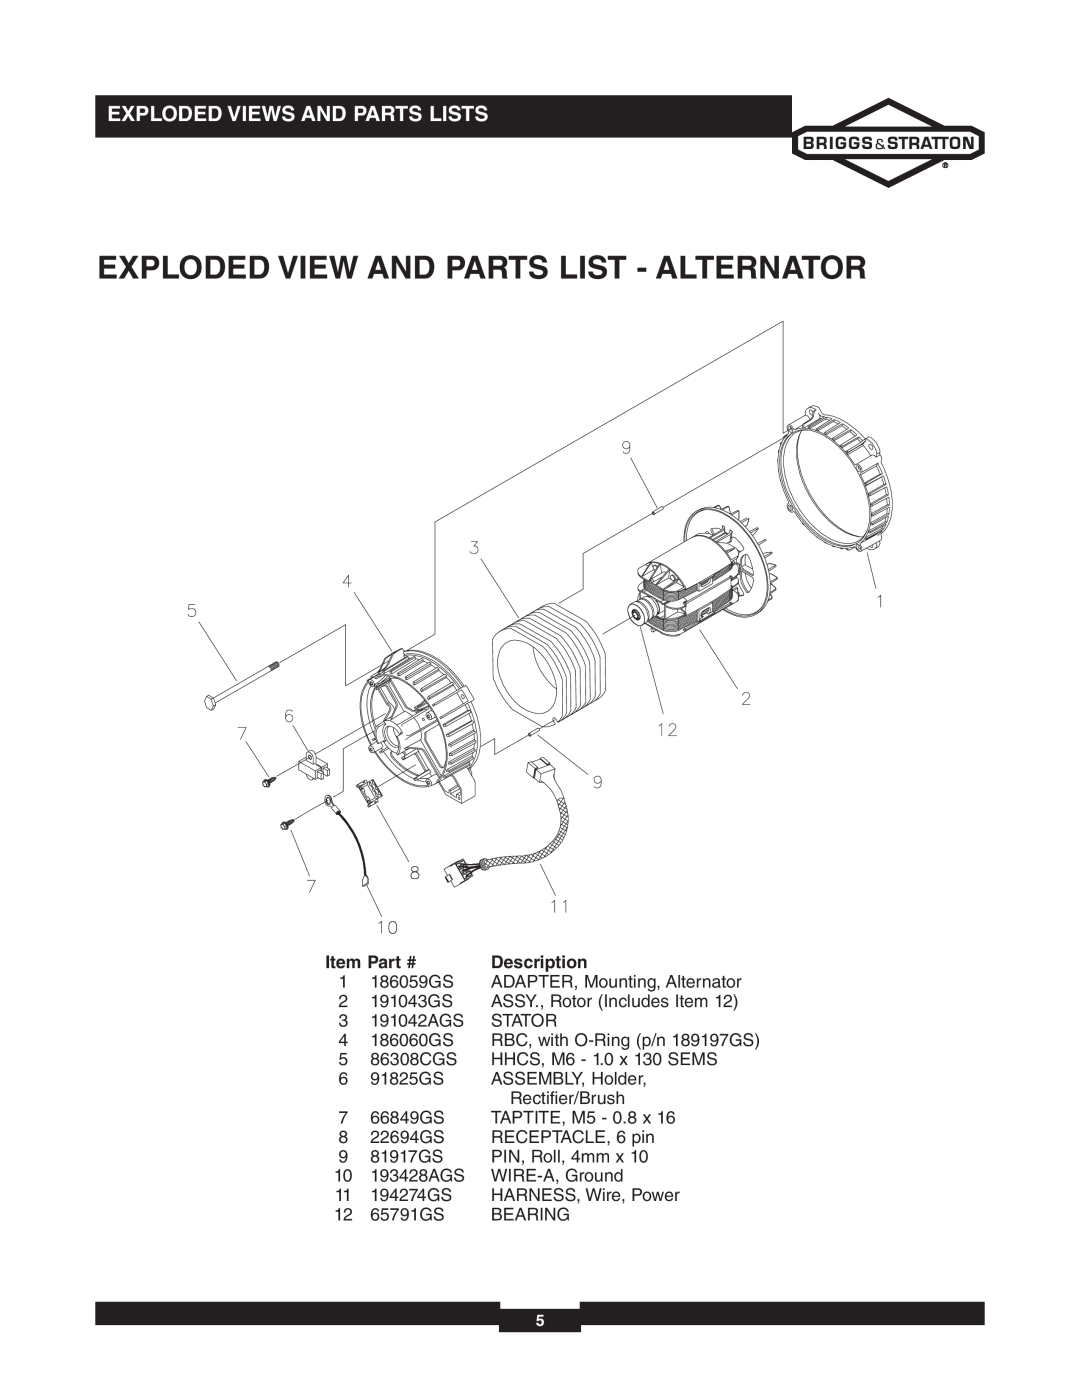 Briggs & Stratton 030235-02 manual Exploded View And Parts List - Alternator, Exploded Views And Parts Lists, Description 